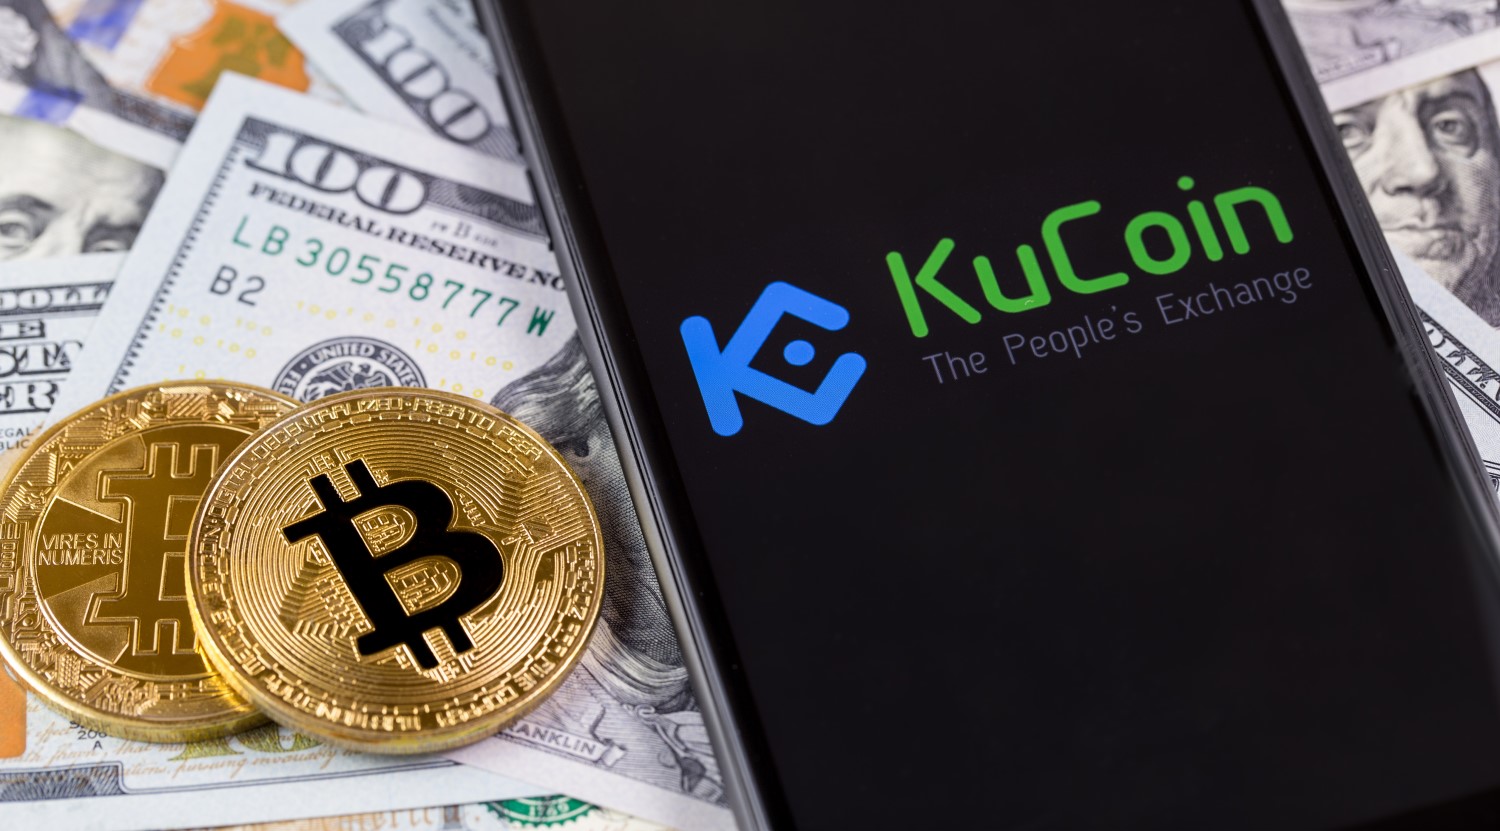 KuCoin Launches Bitcoin Derivatives Trading With 20x Leverage